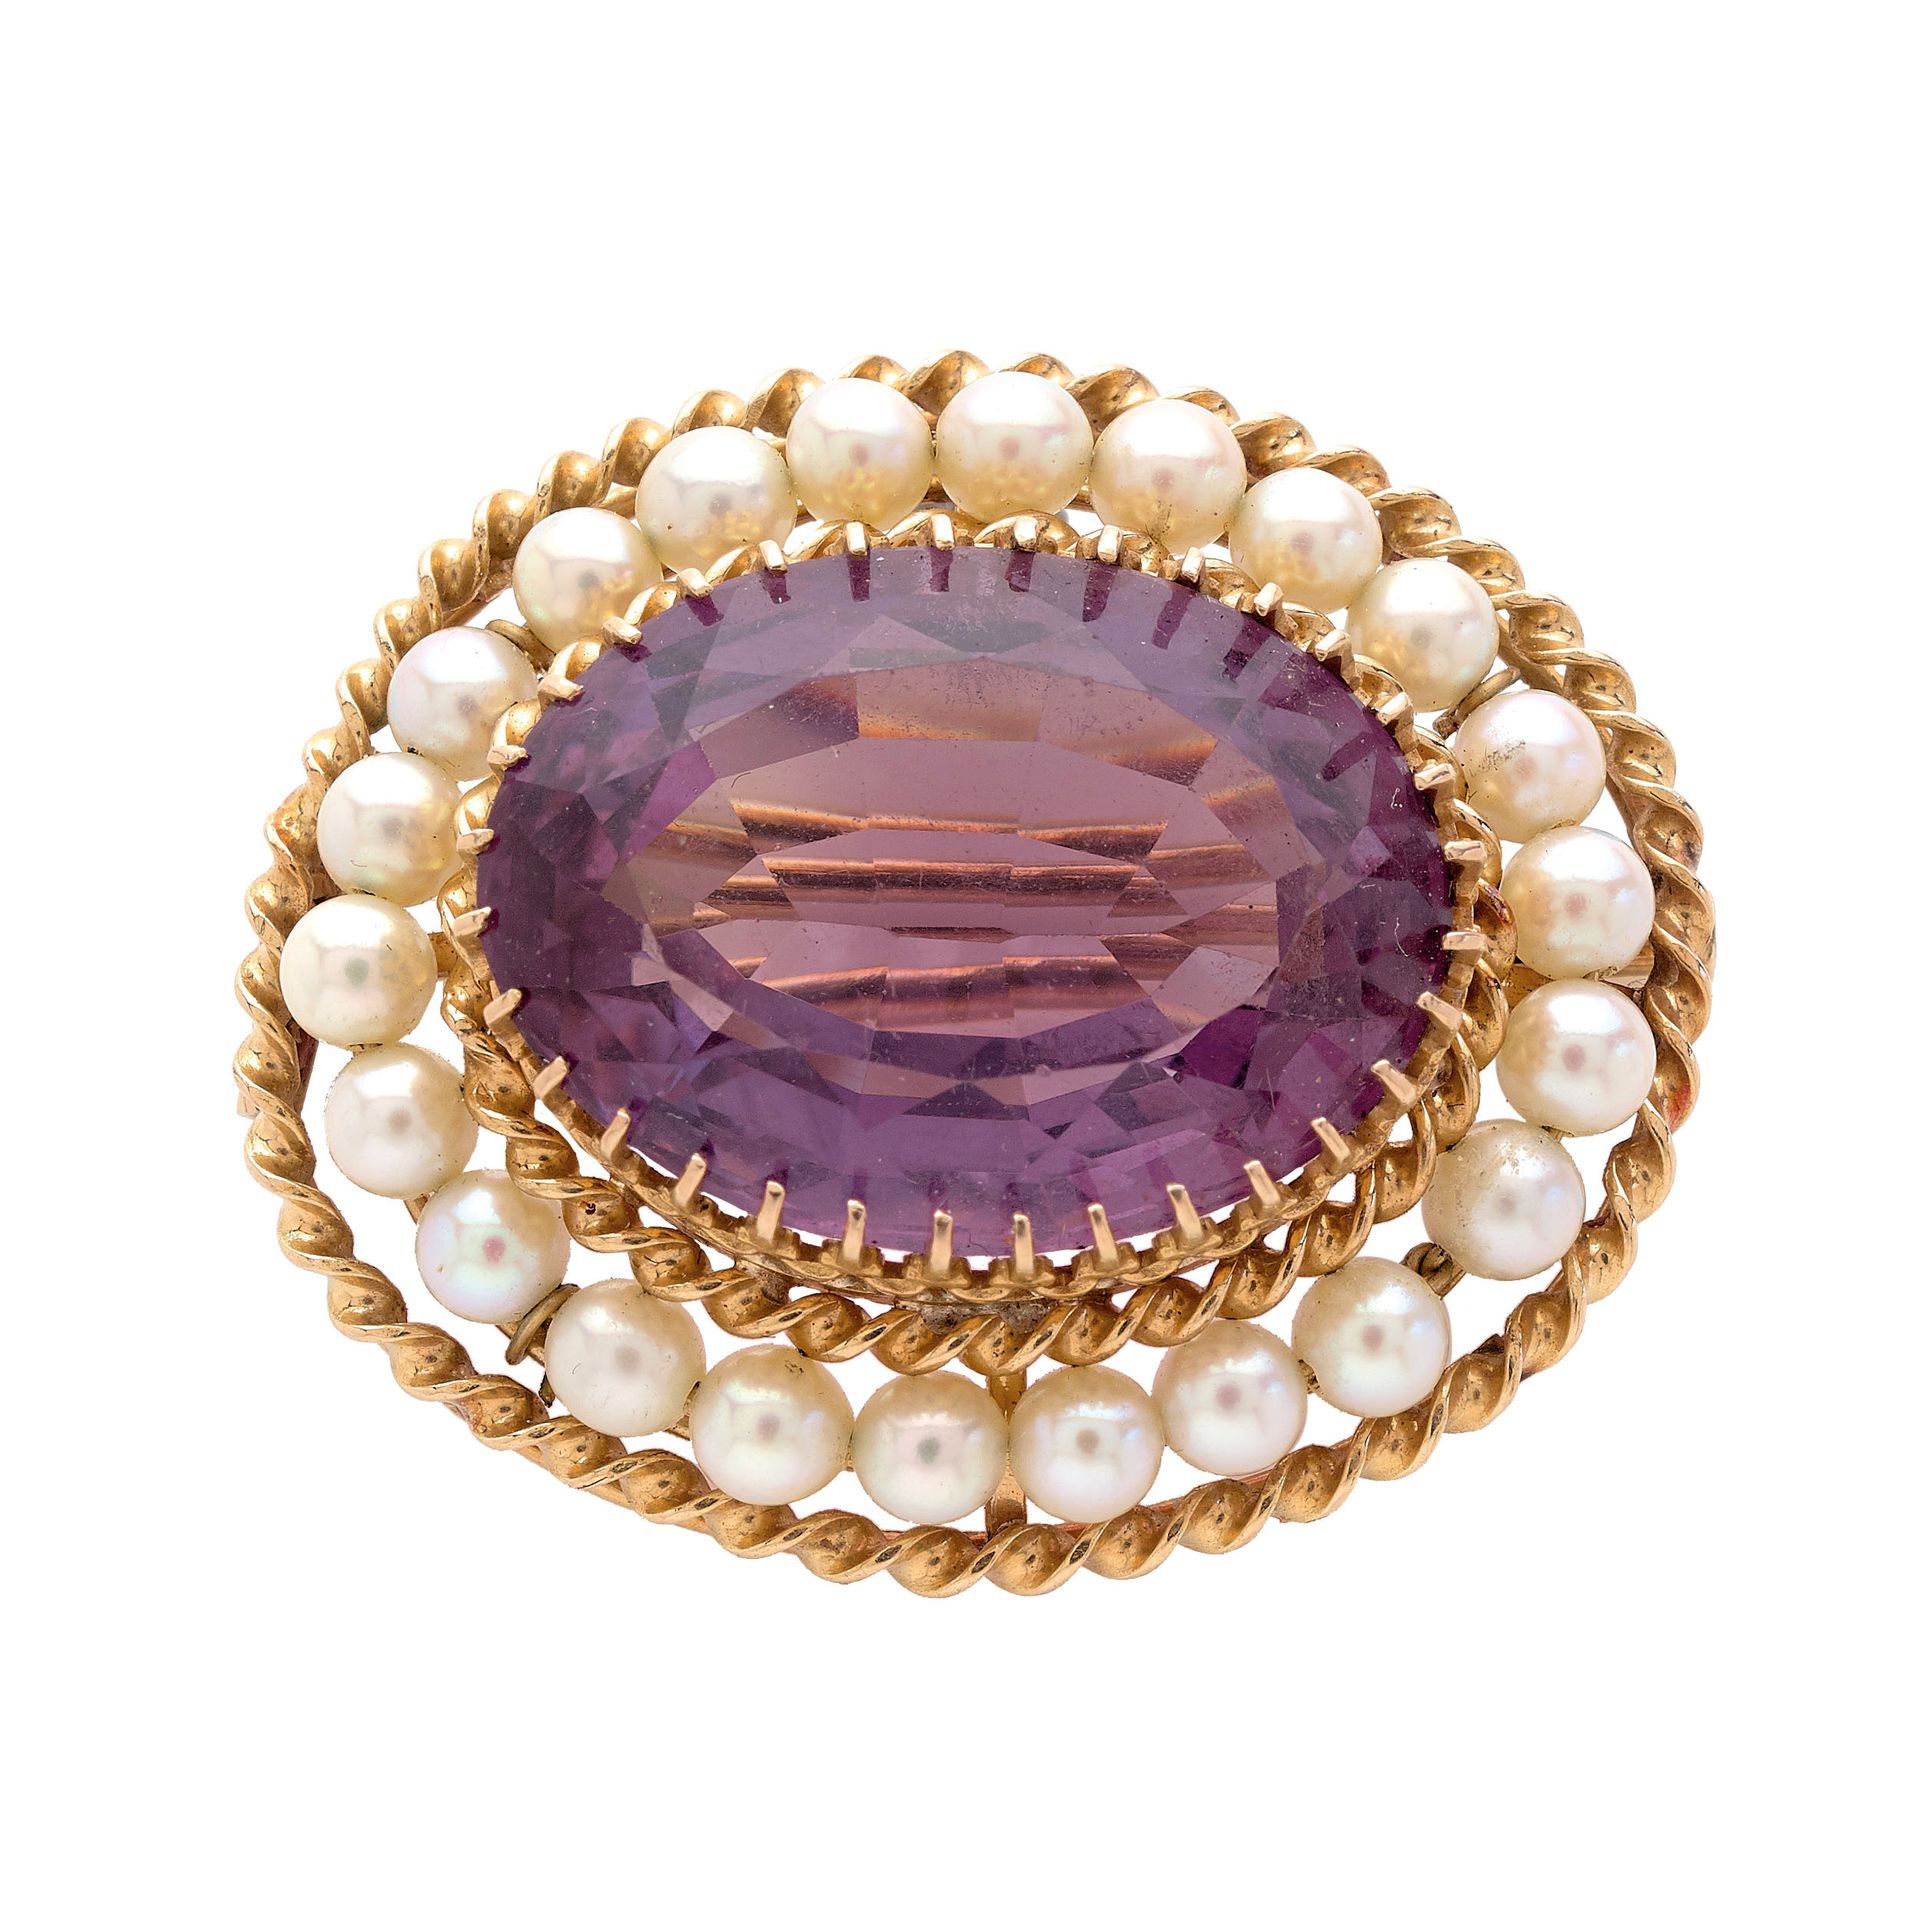 Null ANTIQUE BROOCH

In yellow gold, set with an oval amethyst surrounded by sma&hellip;